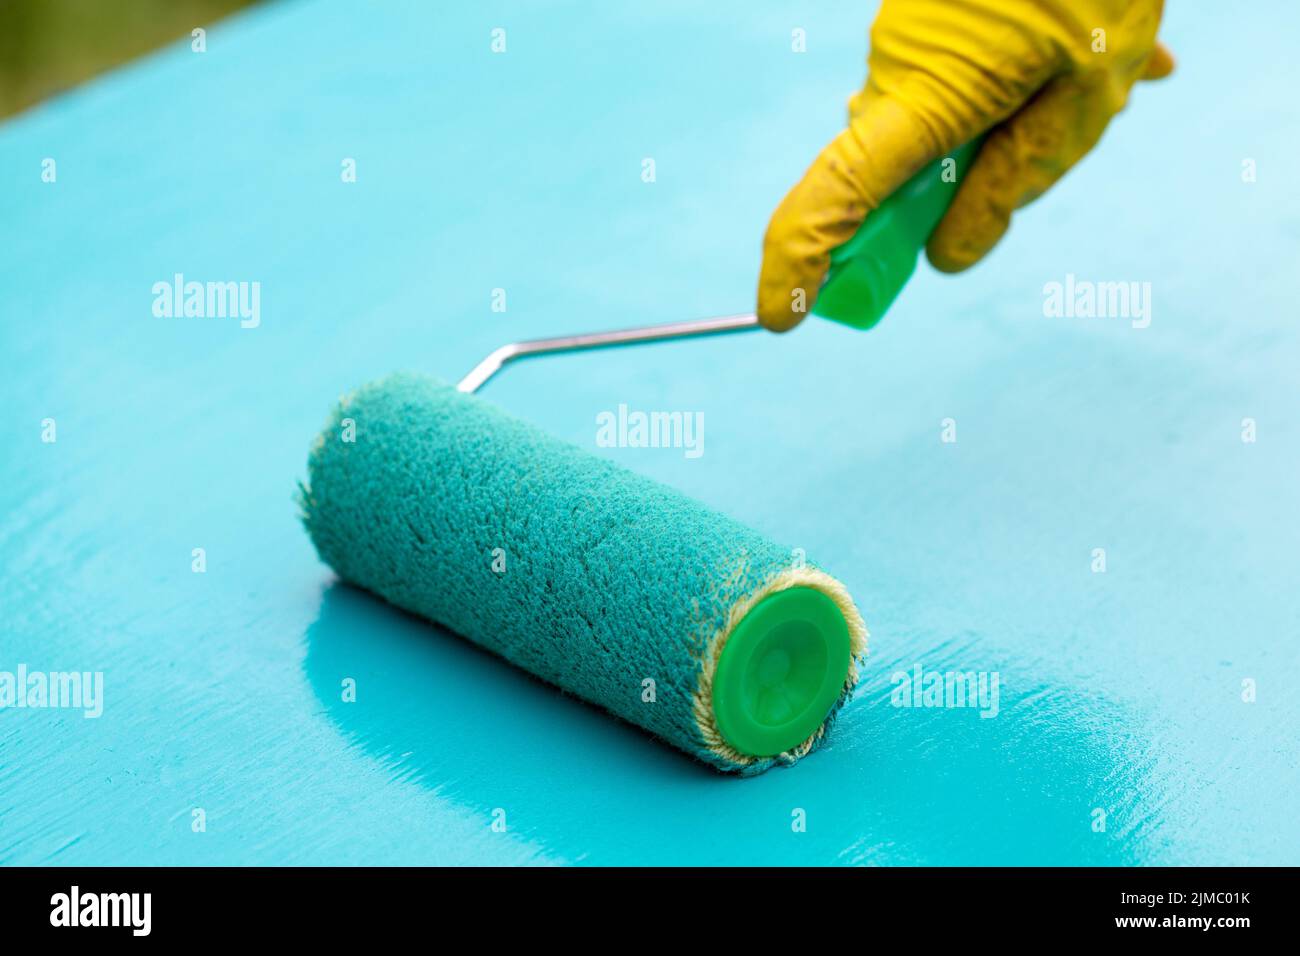 Paint roller in hand and board with turquoise paint Stock Photo